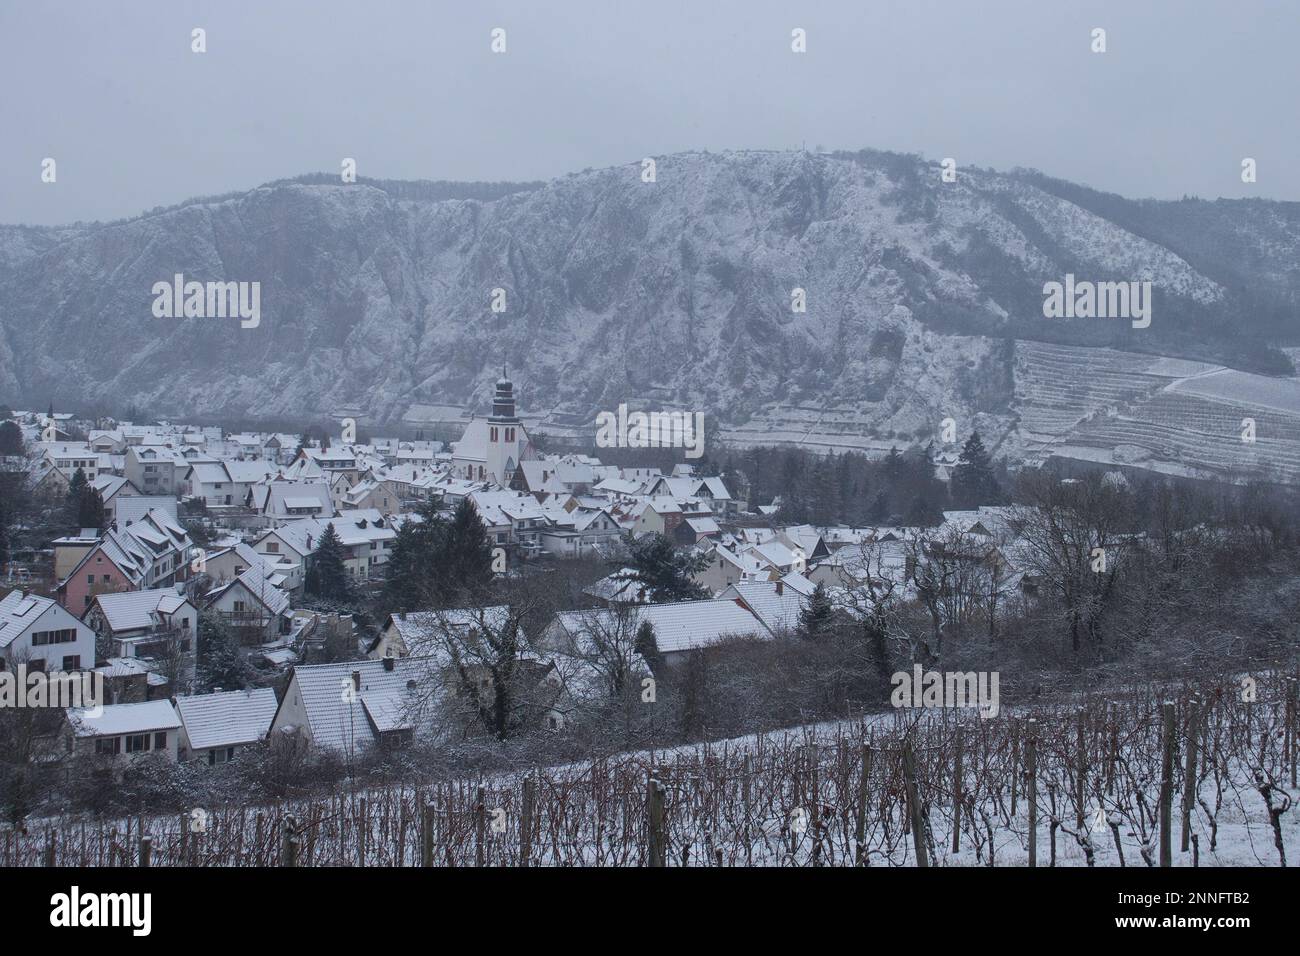 Bad Munster am Stein-Ebernburg, Germany - Febryary 8, 2021: Houses and church in Bad Munster in front of Rotenfels covered in snow on a cold, grey win Stock Photo